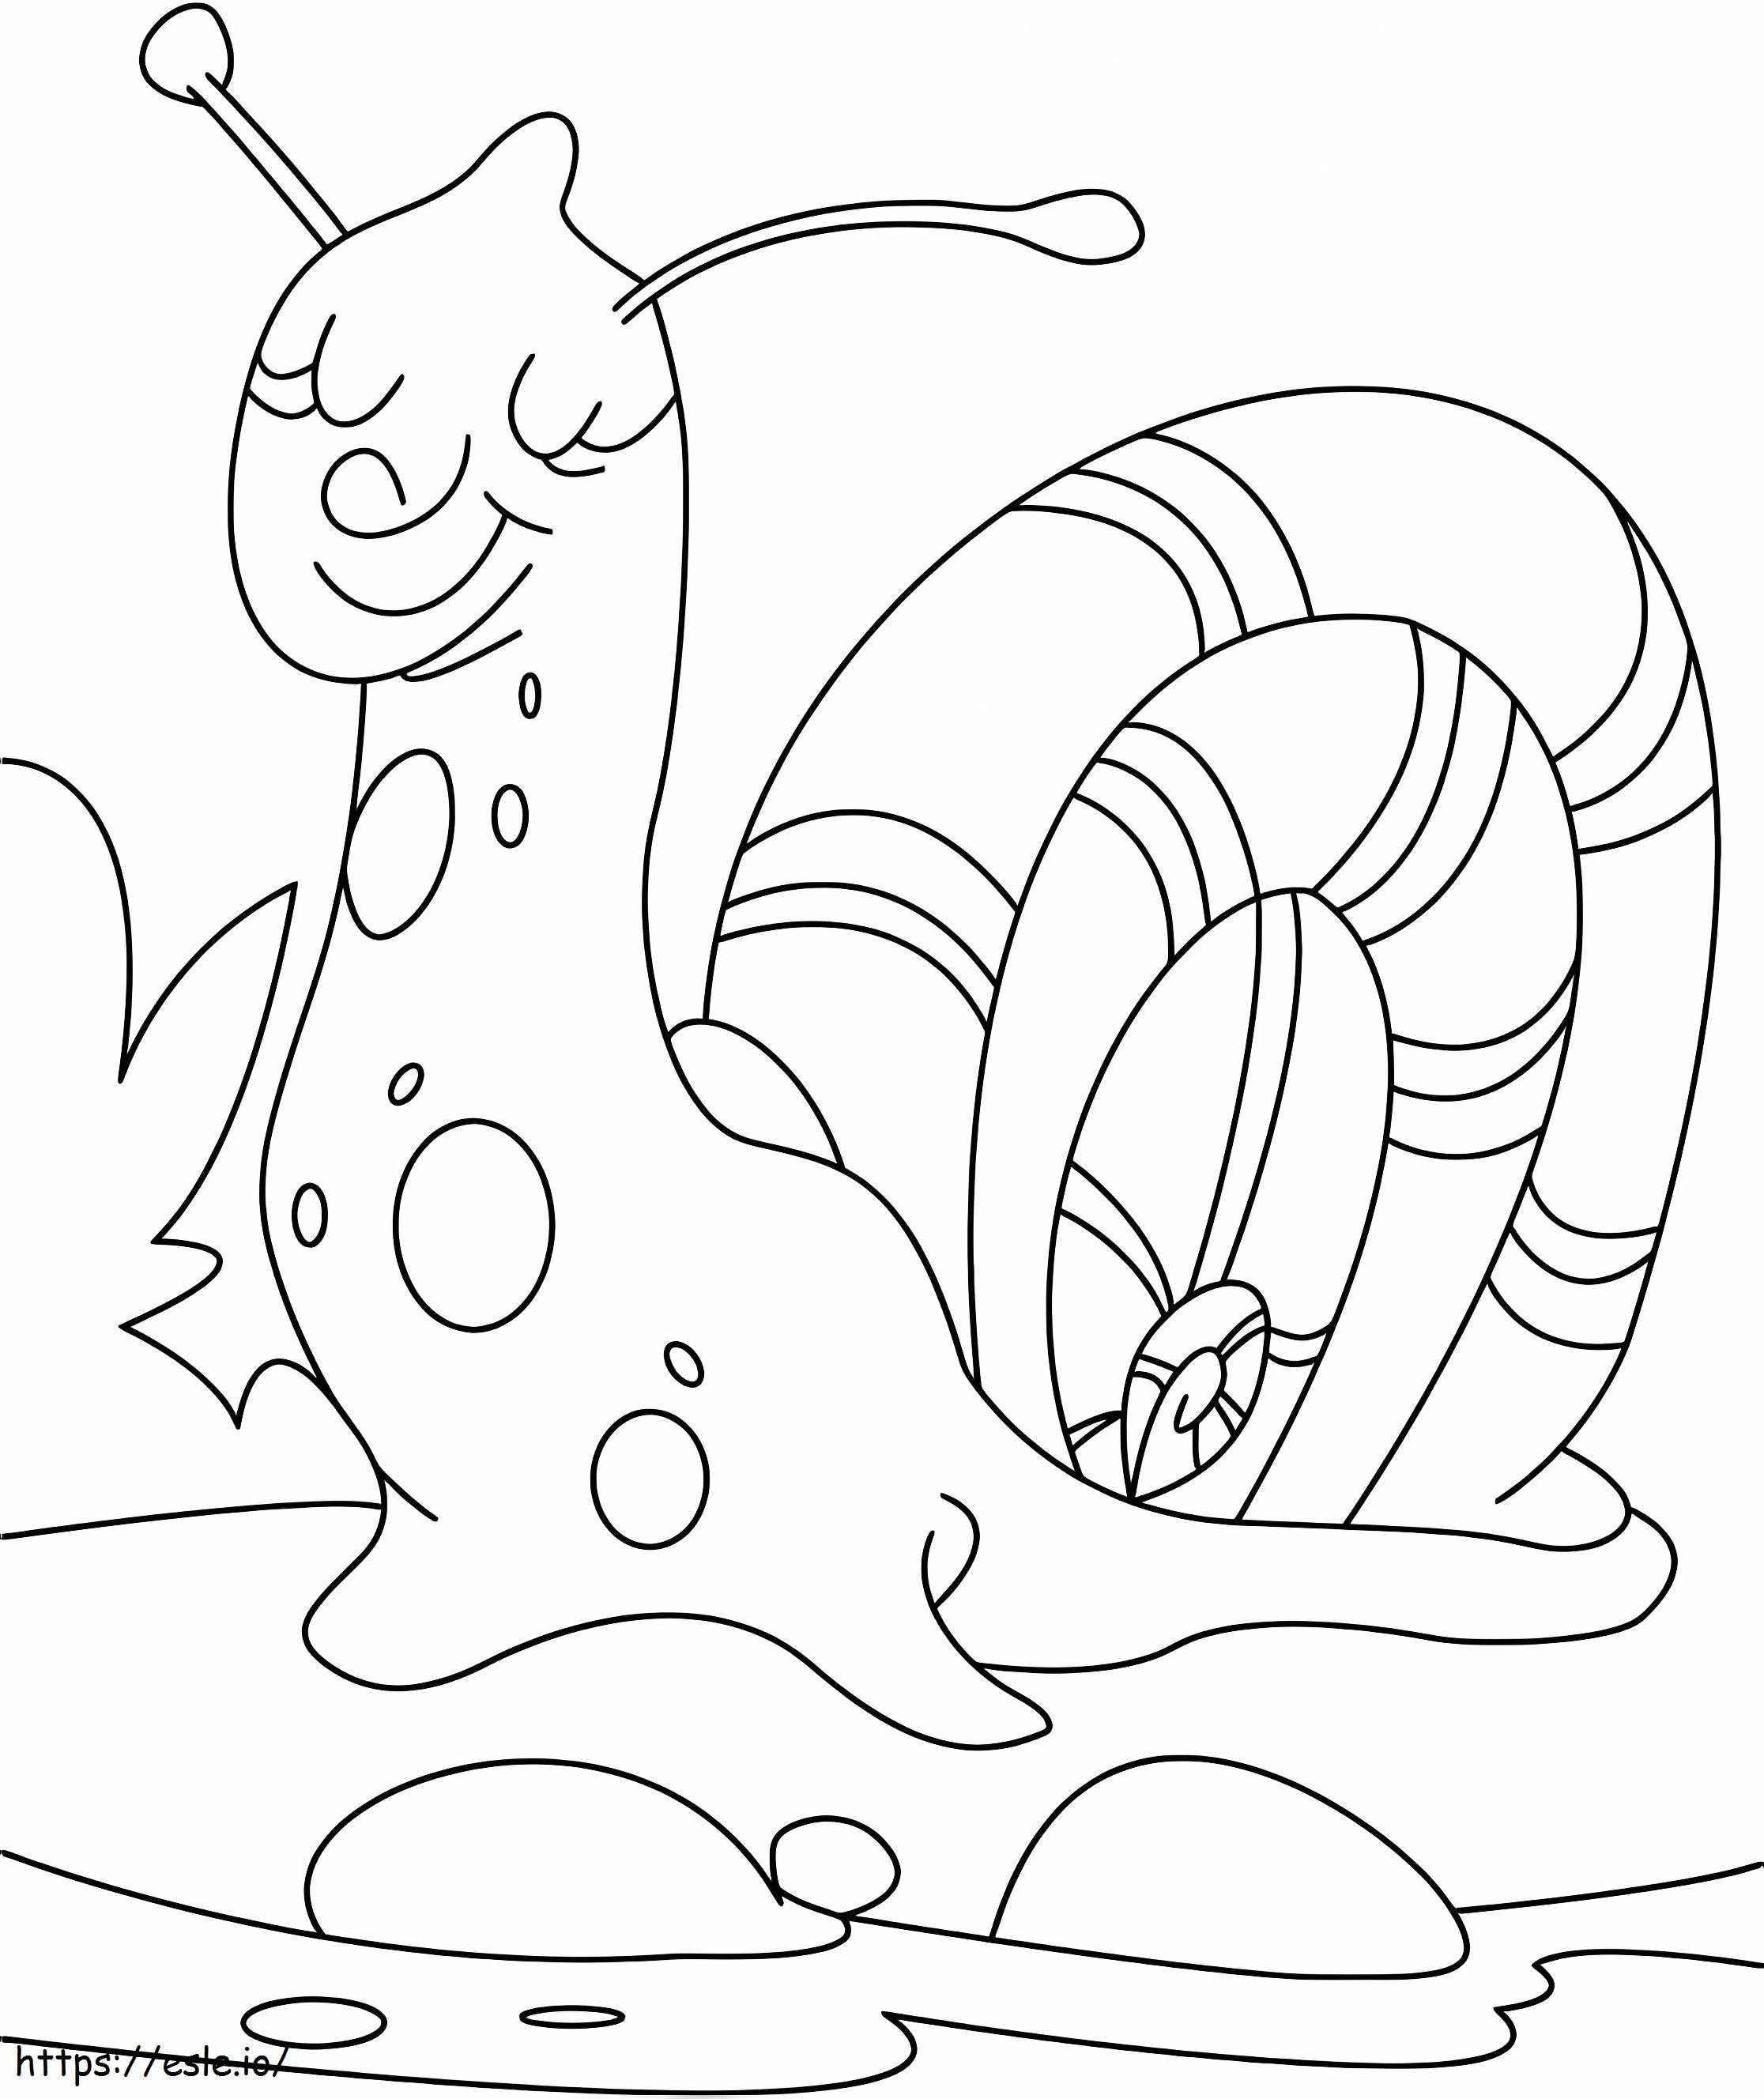 Sleeping Snail coloring page